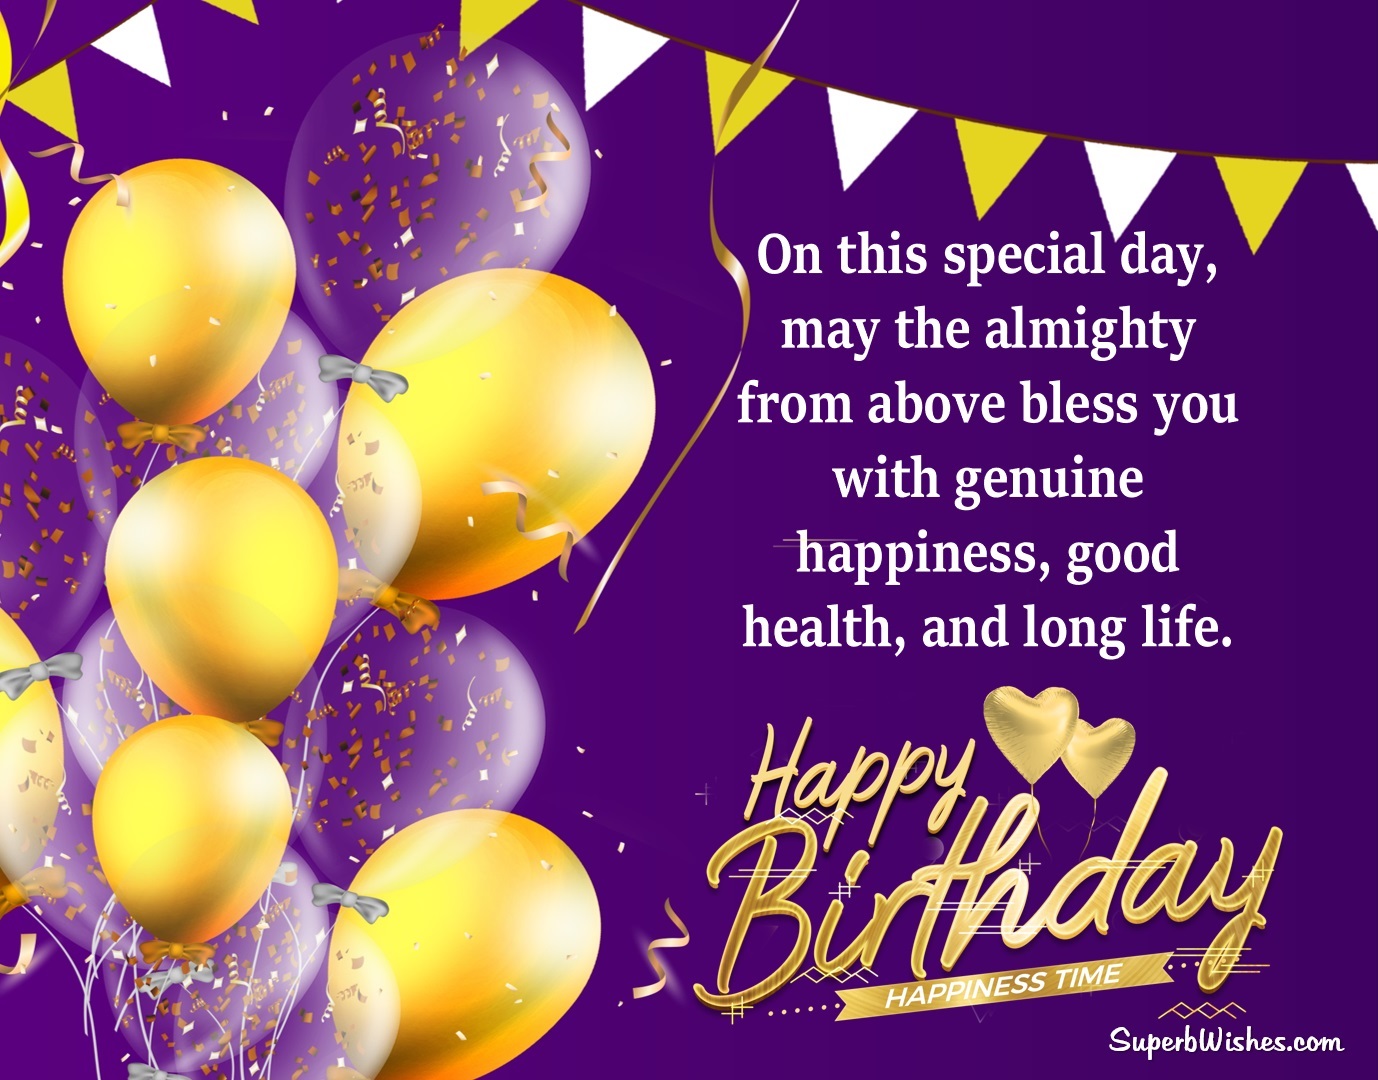 Happy birthday blessings images. Superbwishes.com